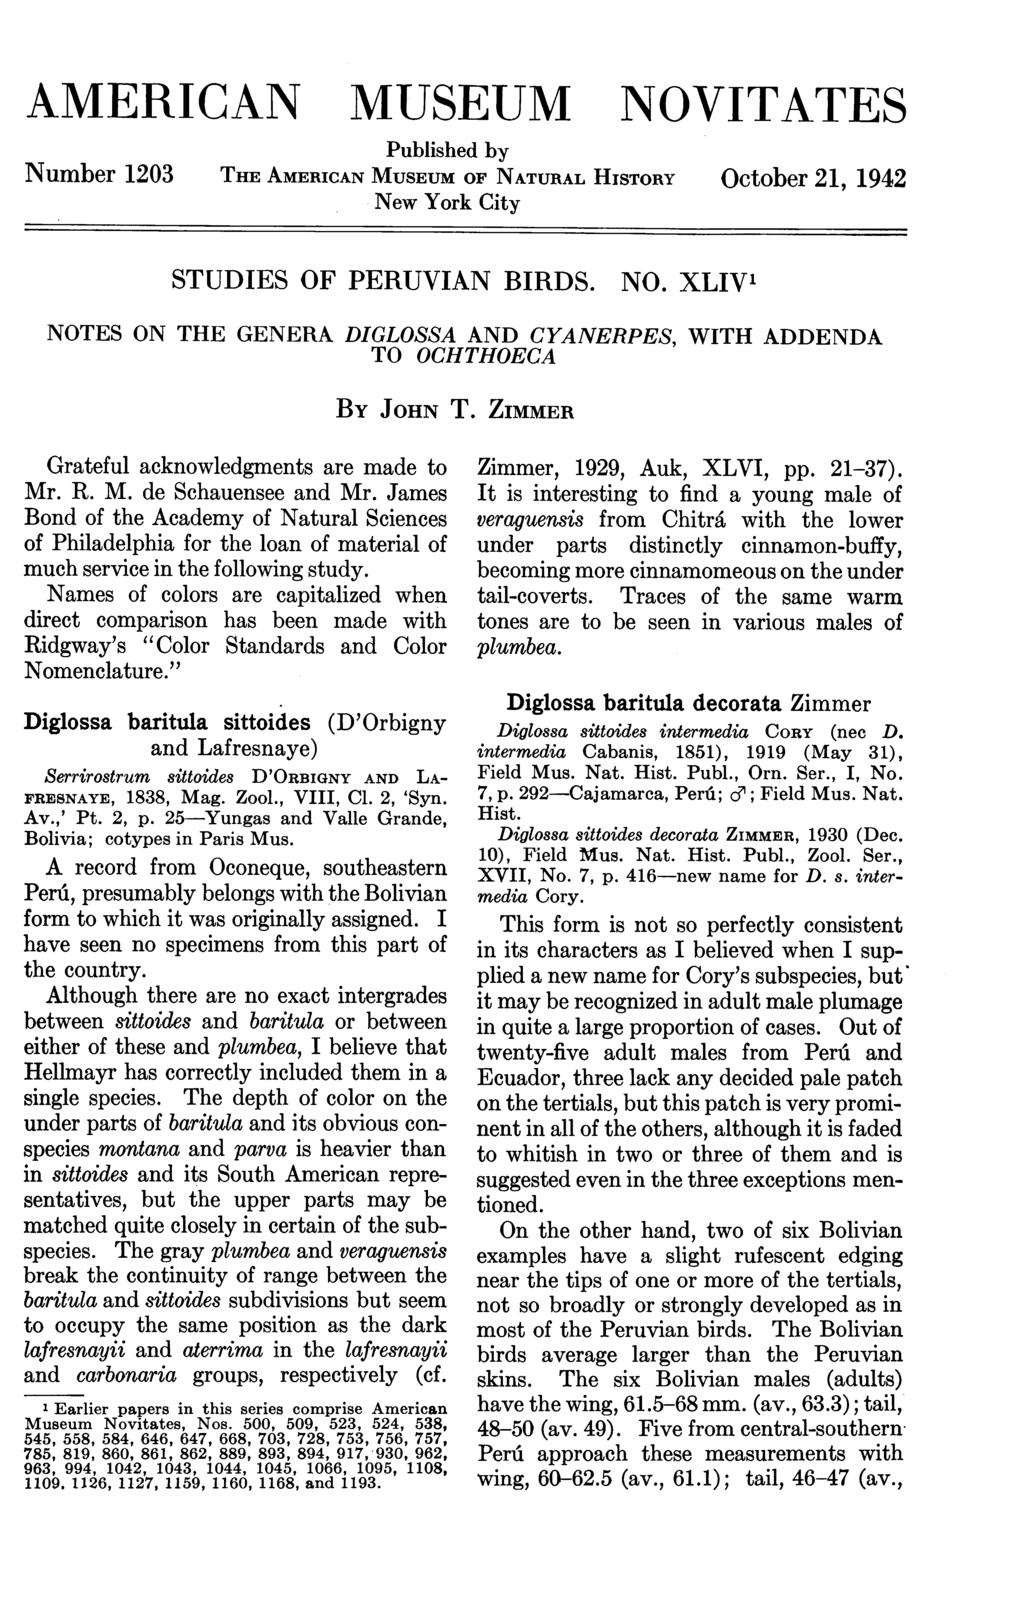 AMERICAN MUSEUM NOVITATES Published by Number 1203 THE AMERICAN MUSEUM OF NATURAL HISTORY October 21, 1942 New York City STUDIES OF PERUVIAN BIRDS. NO. XLIV' NOTES ON THE GENERA DIGLOSSA AND CYANERPES, WITH ADDENDA TO OCHTHOECA BY JOHN T.